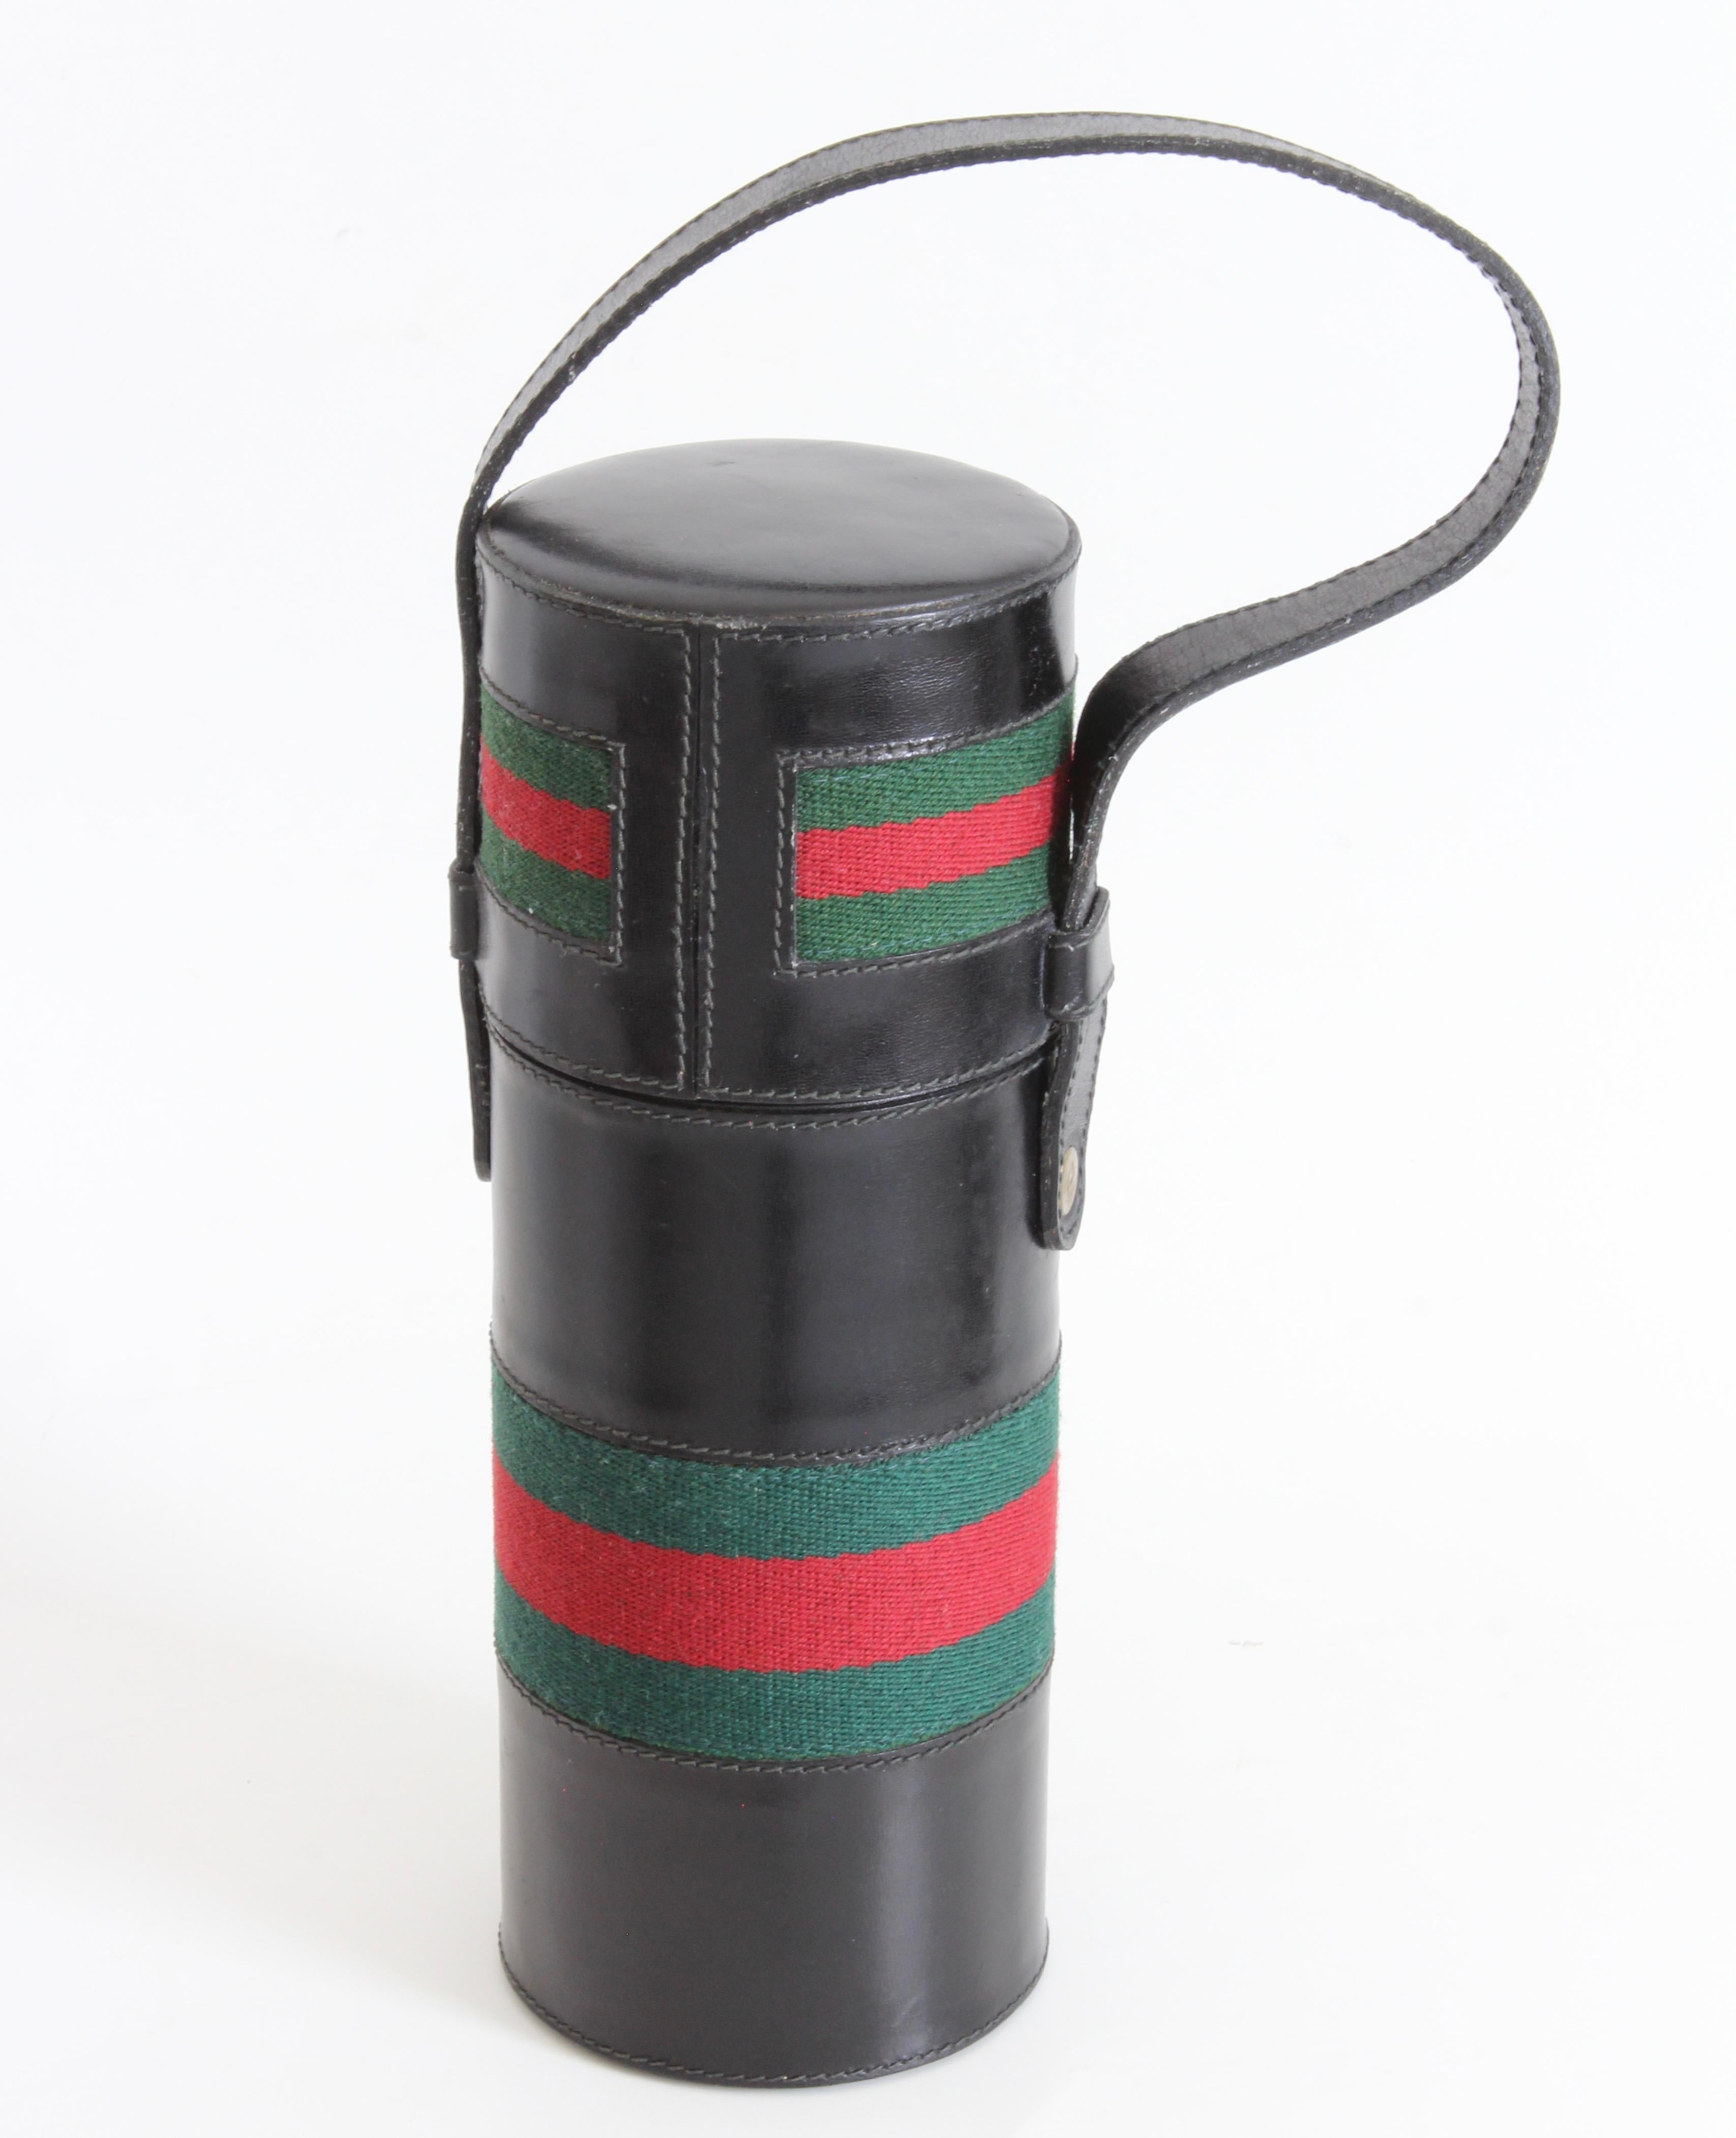 This incredibly rare leather tote with insulated bottle was made by Gucci, most likely in the early 1970s. 

The cover is made from black leather and features Gucci's iconic red and green webbing at the center.  It opens to reveal a steel flask with